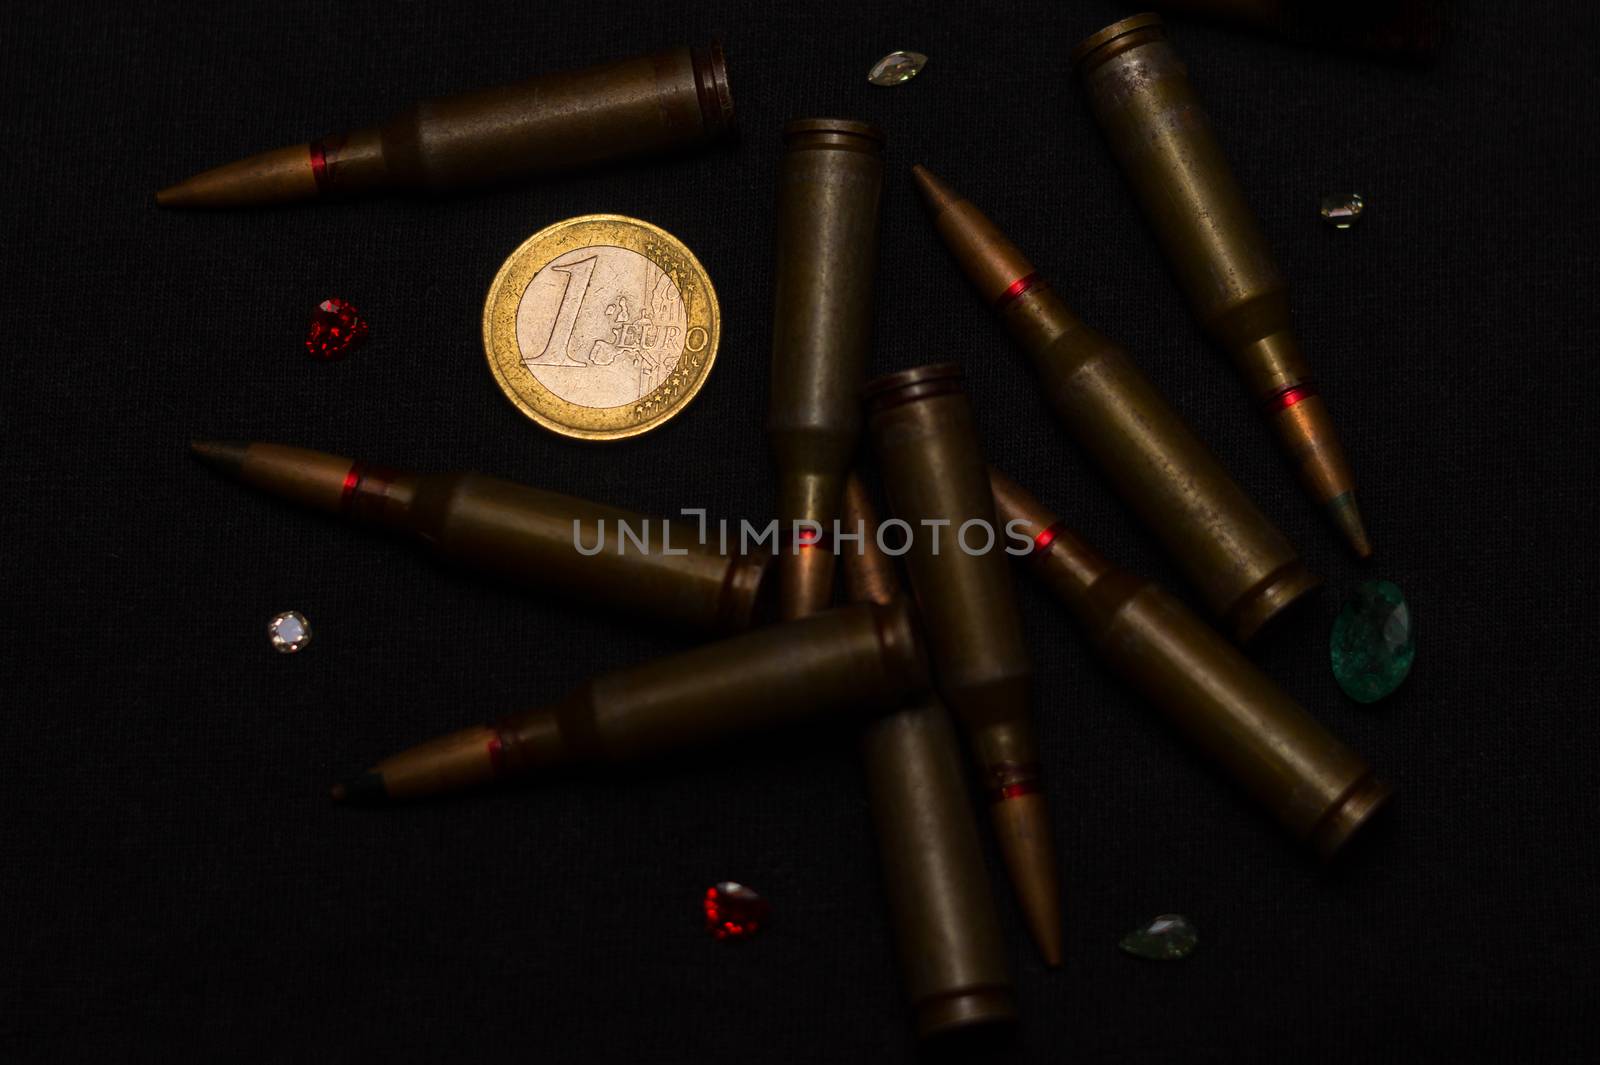 Rifle ammo around one euro coin wigh gemstones on black background. Symbolizes the war for money and one of the world's problems. by alexsdriver